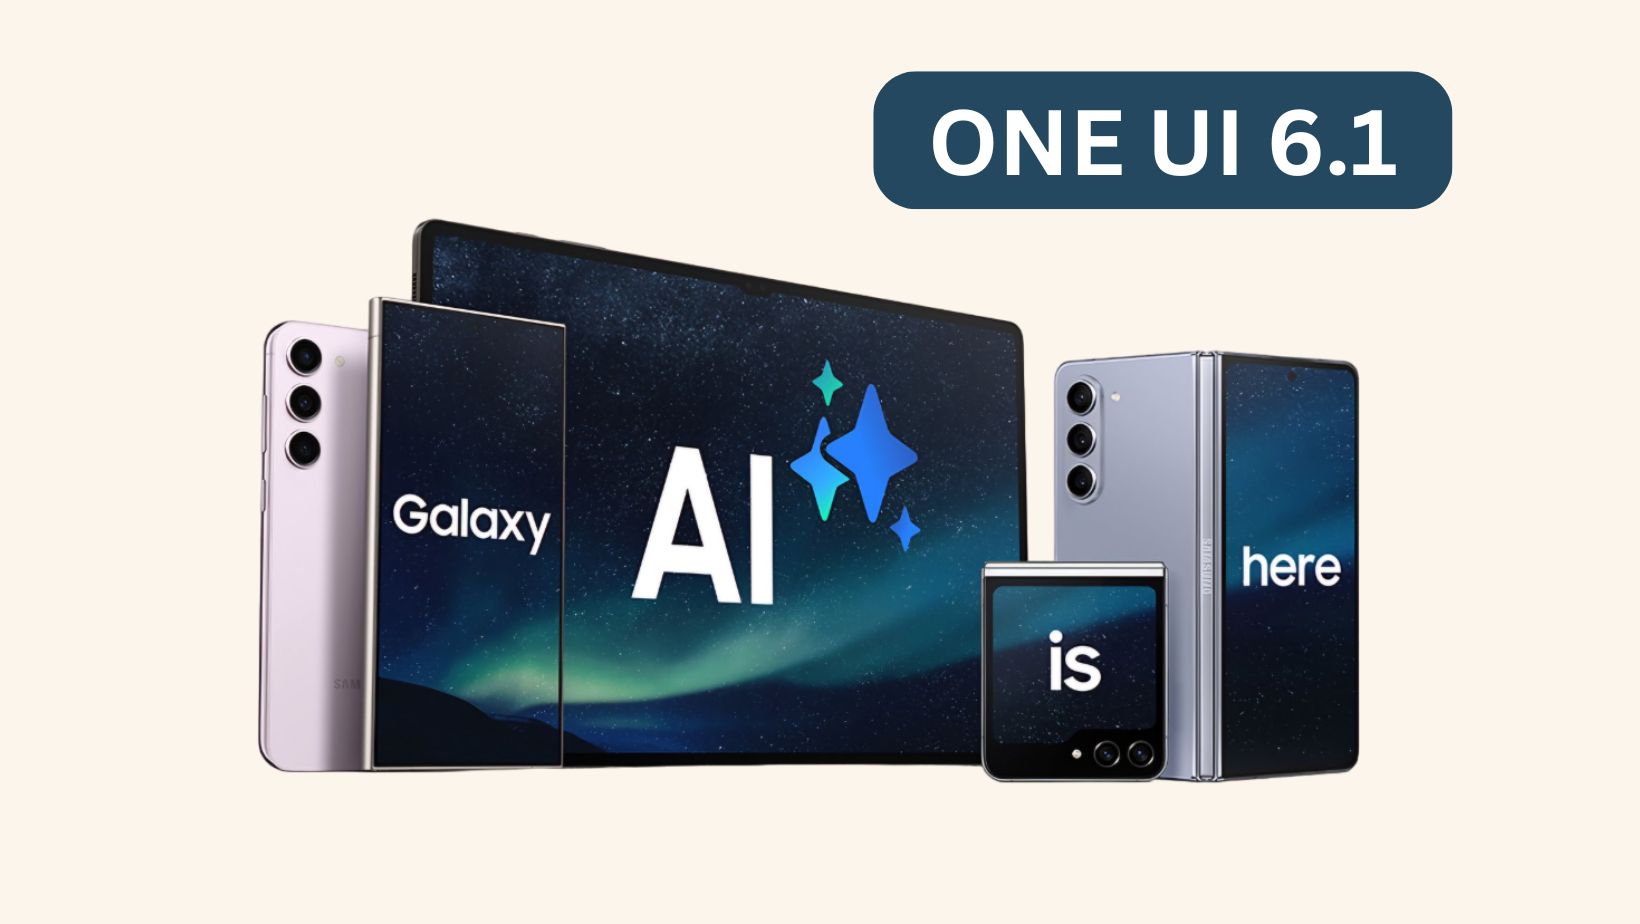 Samsung confirms Galaxy AI (One UI 6.1) for Galaxy S22 series, Z Fold4, Z Flip4, and the Galaxy Tab S8 series